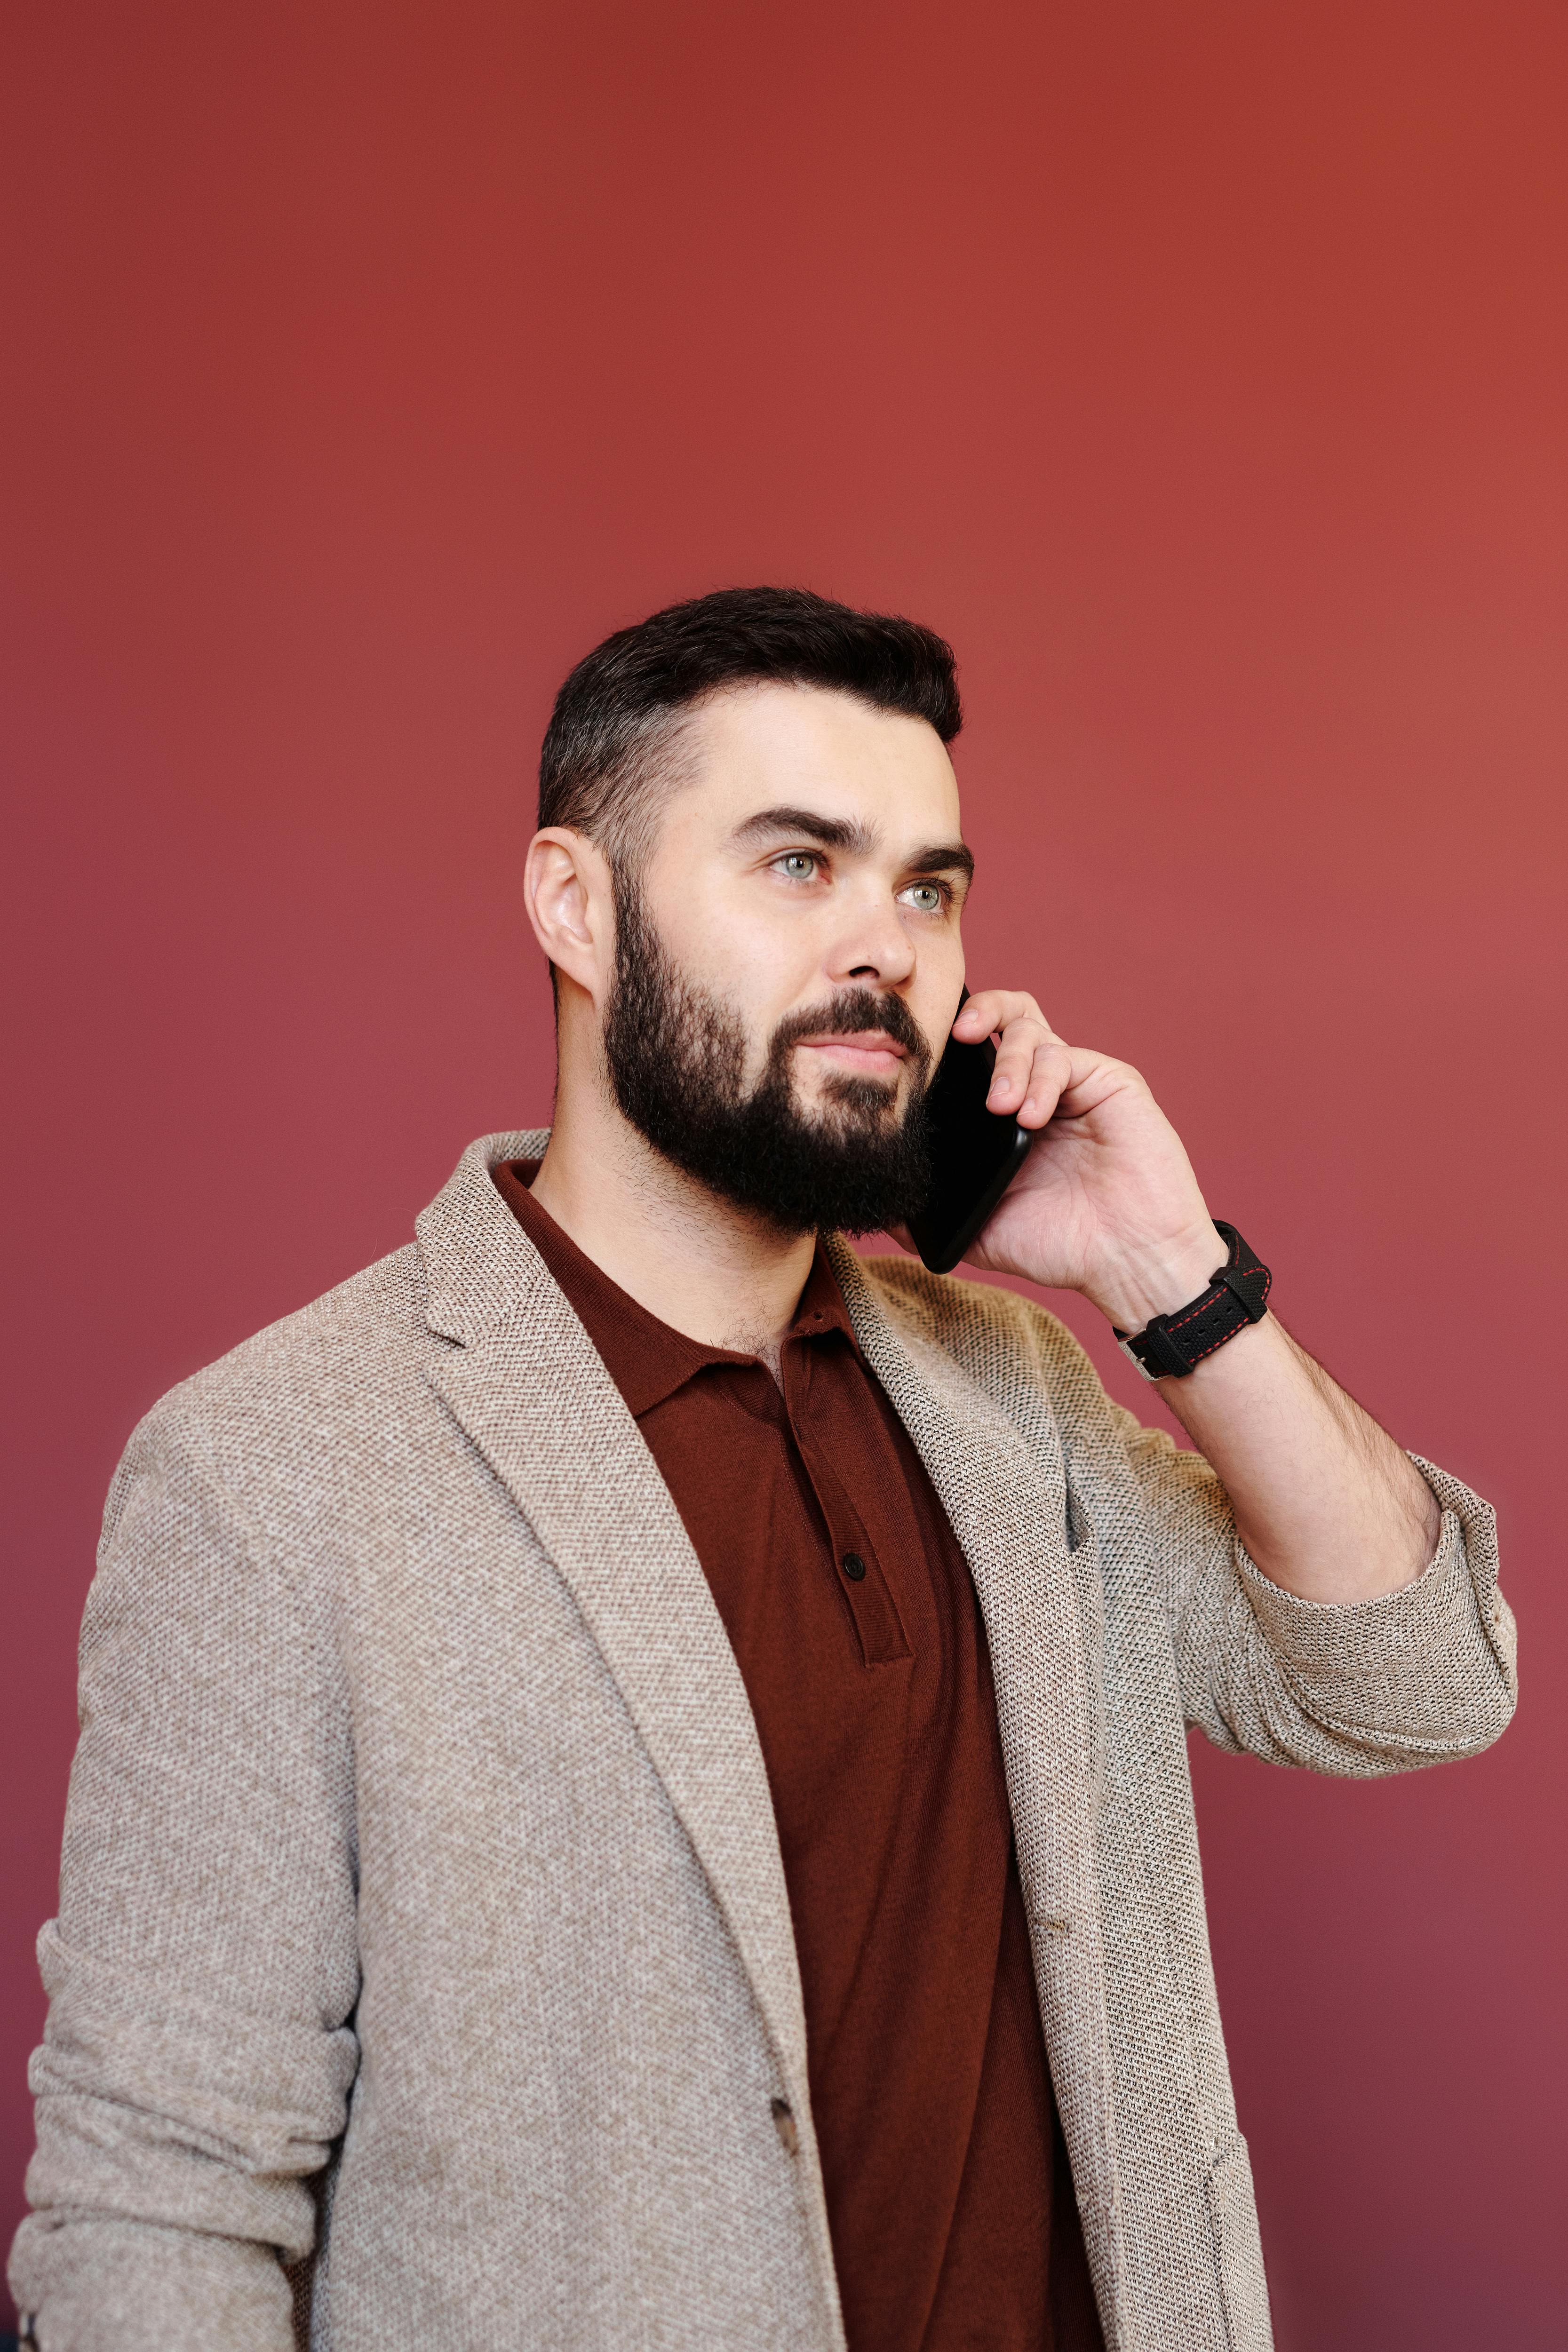 A man making a phone call. For illustration purposes only | Source: Pexels